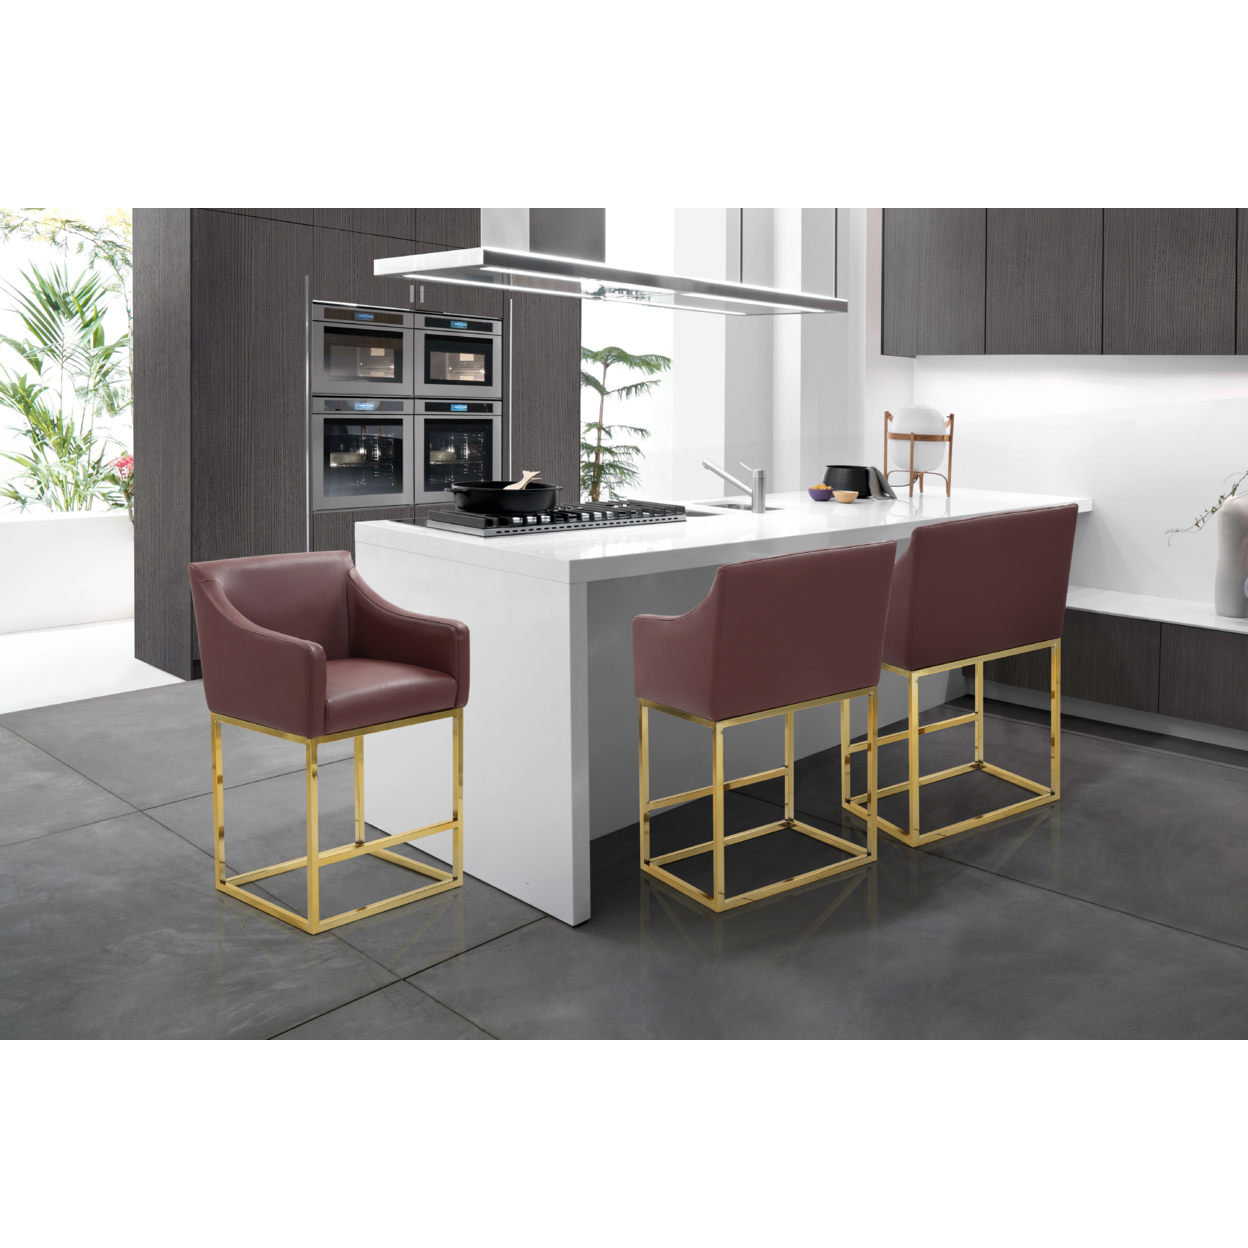 Etna Bar Stool Or Counter Stool Chair PU Leather Upholstered Slope Arm Design Architectural Goldtone Solid Metal Base - Wine, Height: 38.25